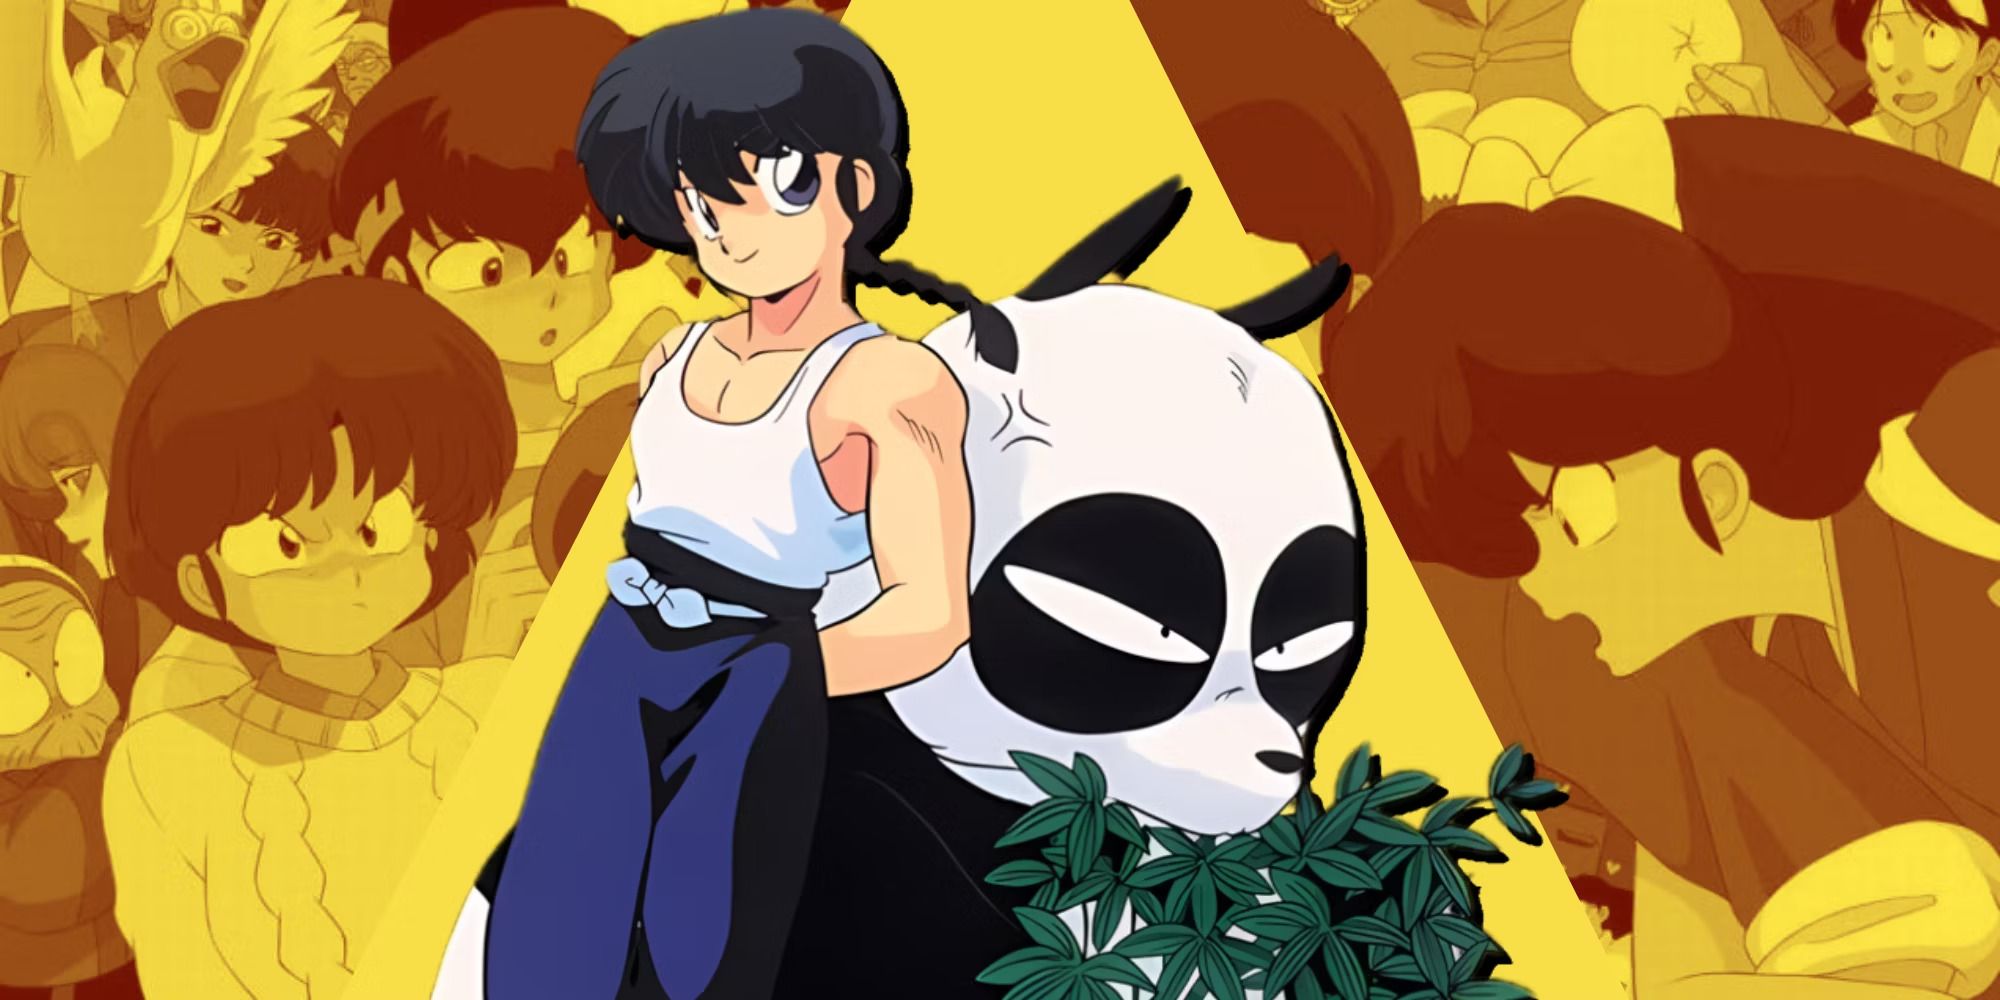 custom-image-of-ranma-and-genma-saotome-in-the-center-with-the-cast-of-ranma-12-in-the-background